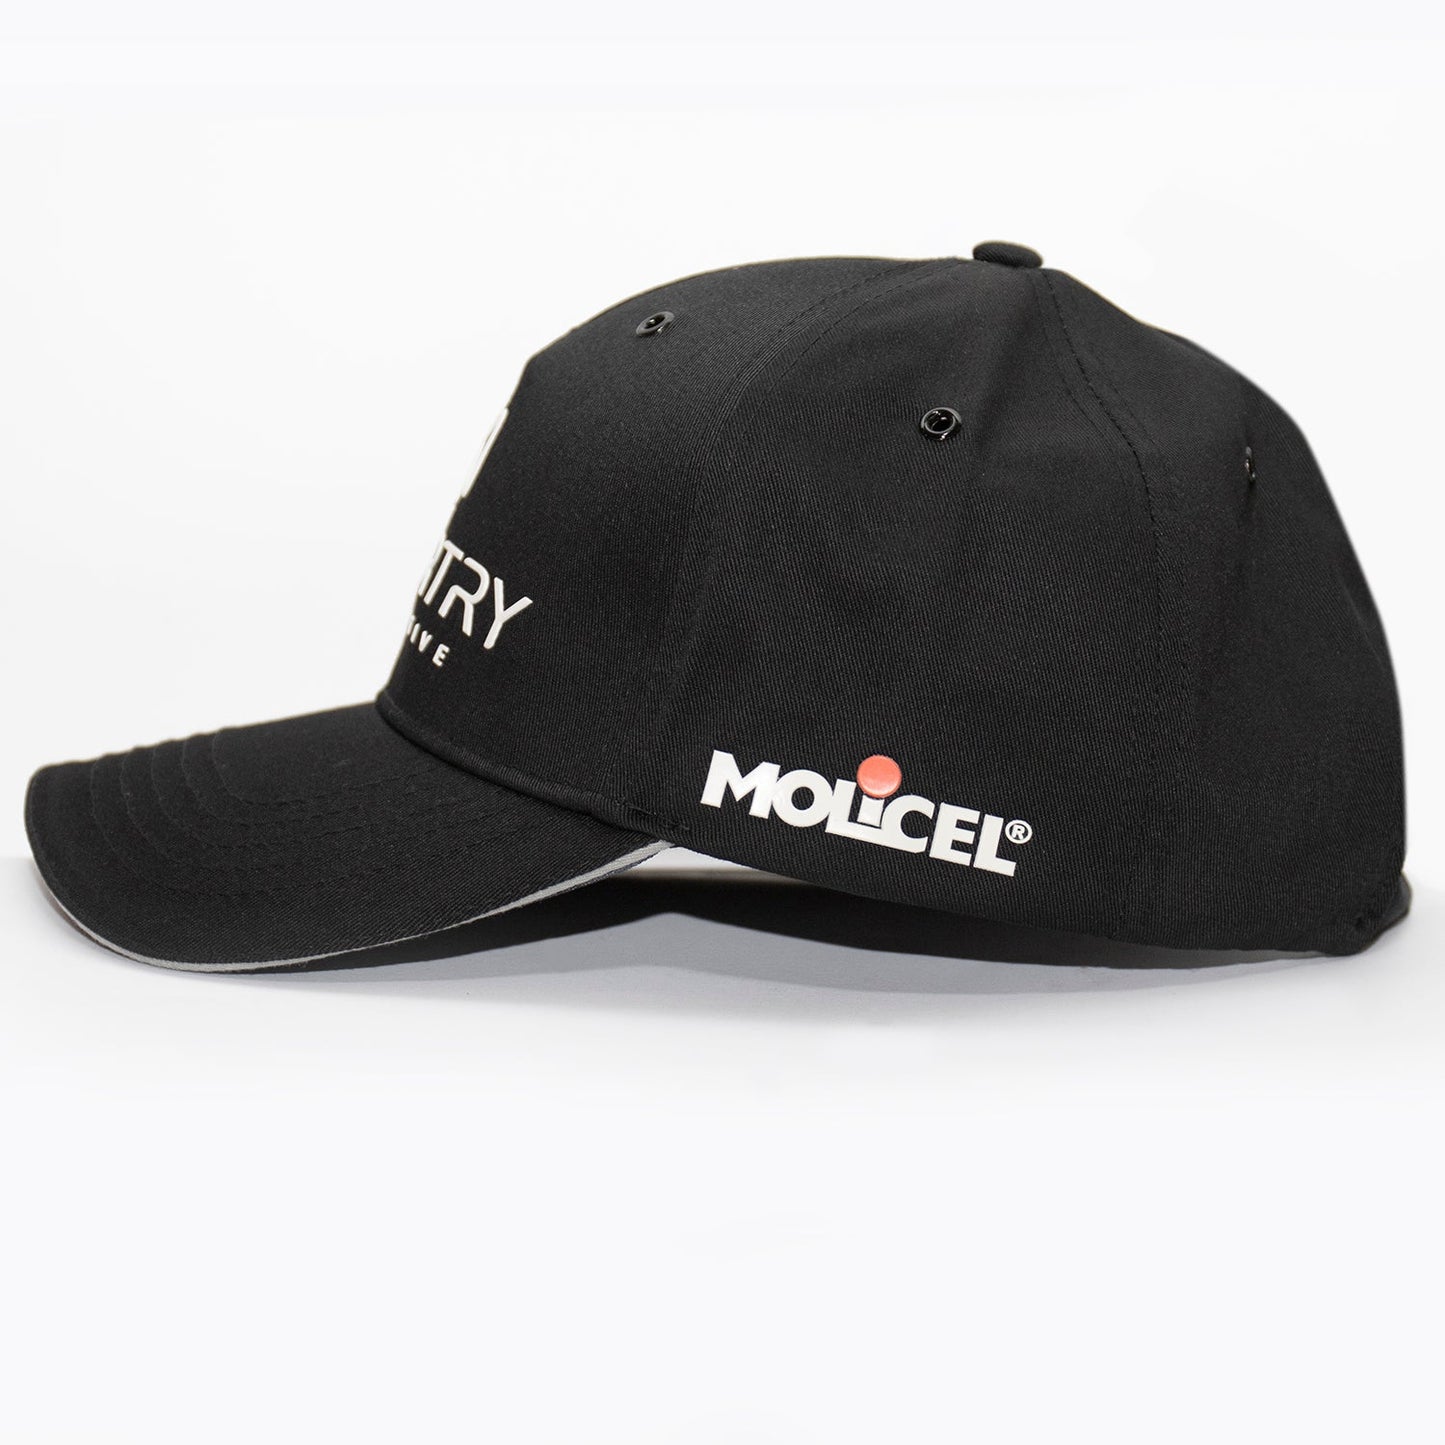 SIGNED -  Official McMurtry Automotive Team and Drivers Cap